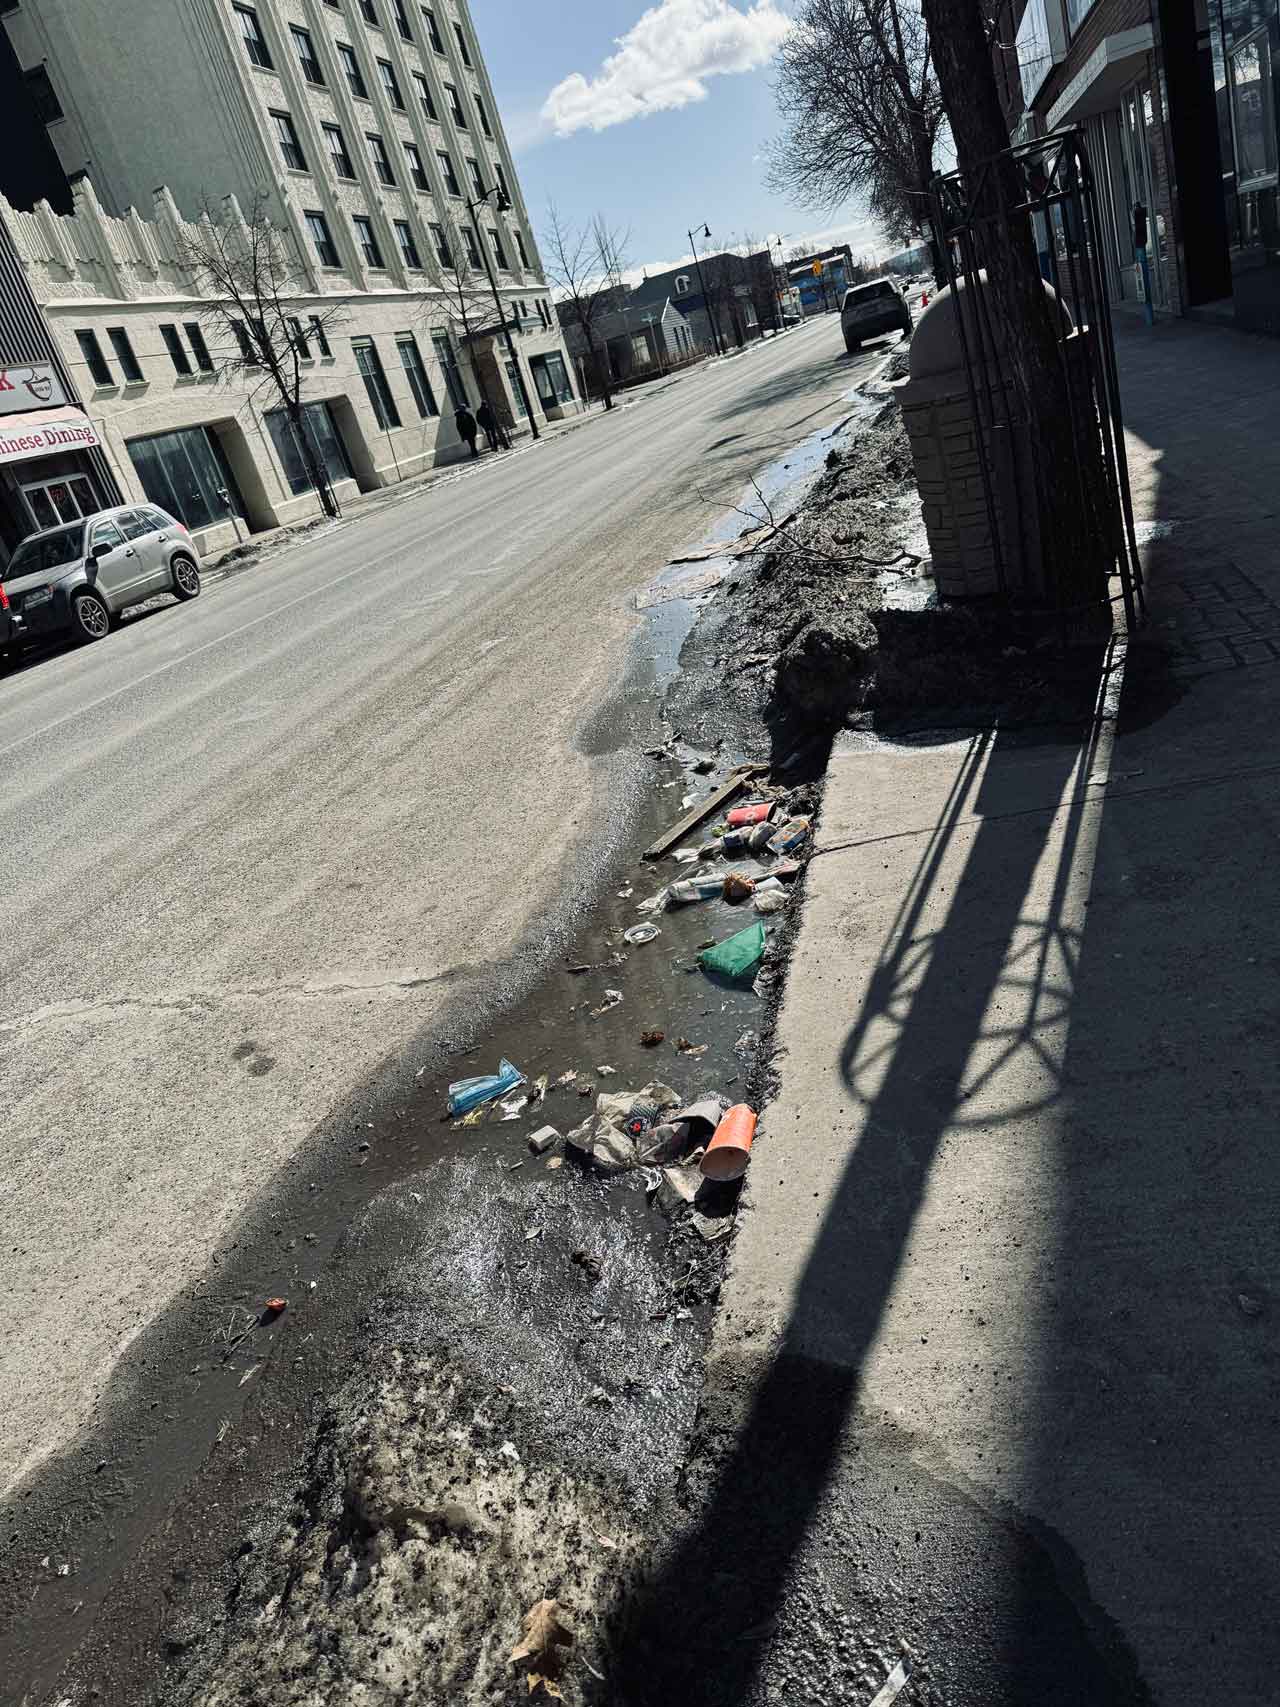 Understanding the Impact of Urban Neglect Through Litter and Disorder